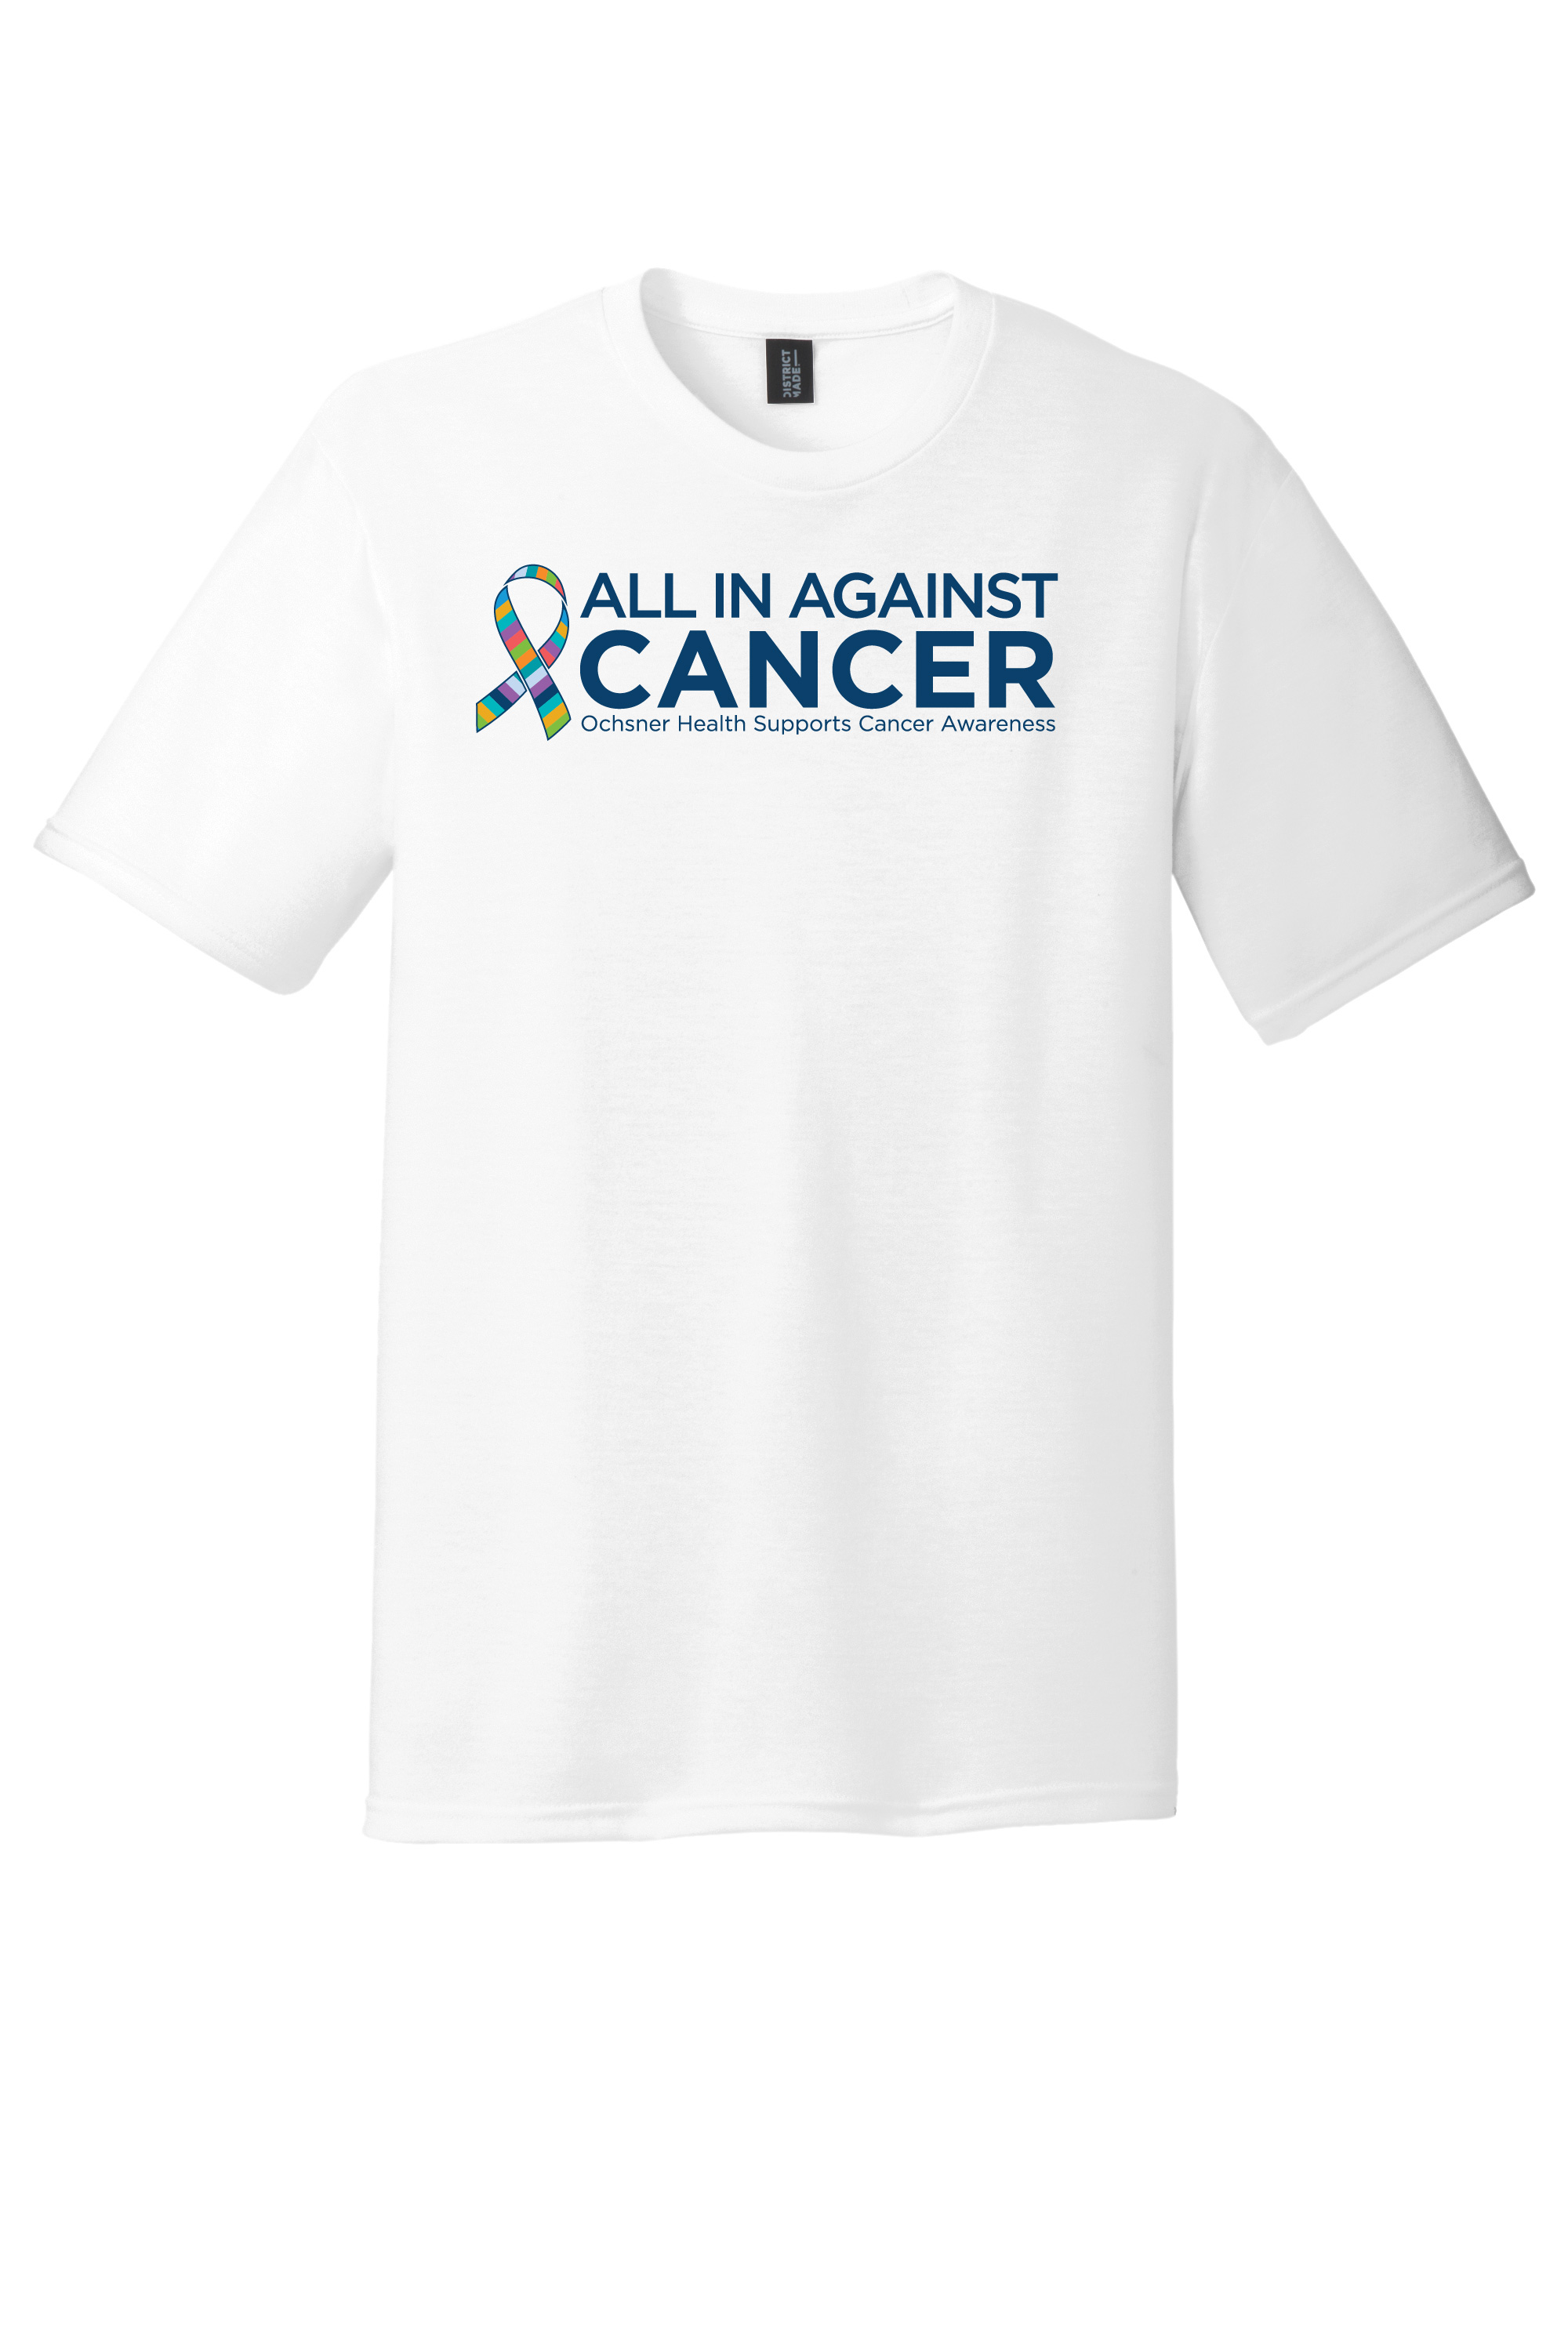 All in Against Cancer Unisex T-Shirt, White, large image number 1